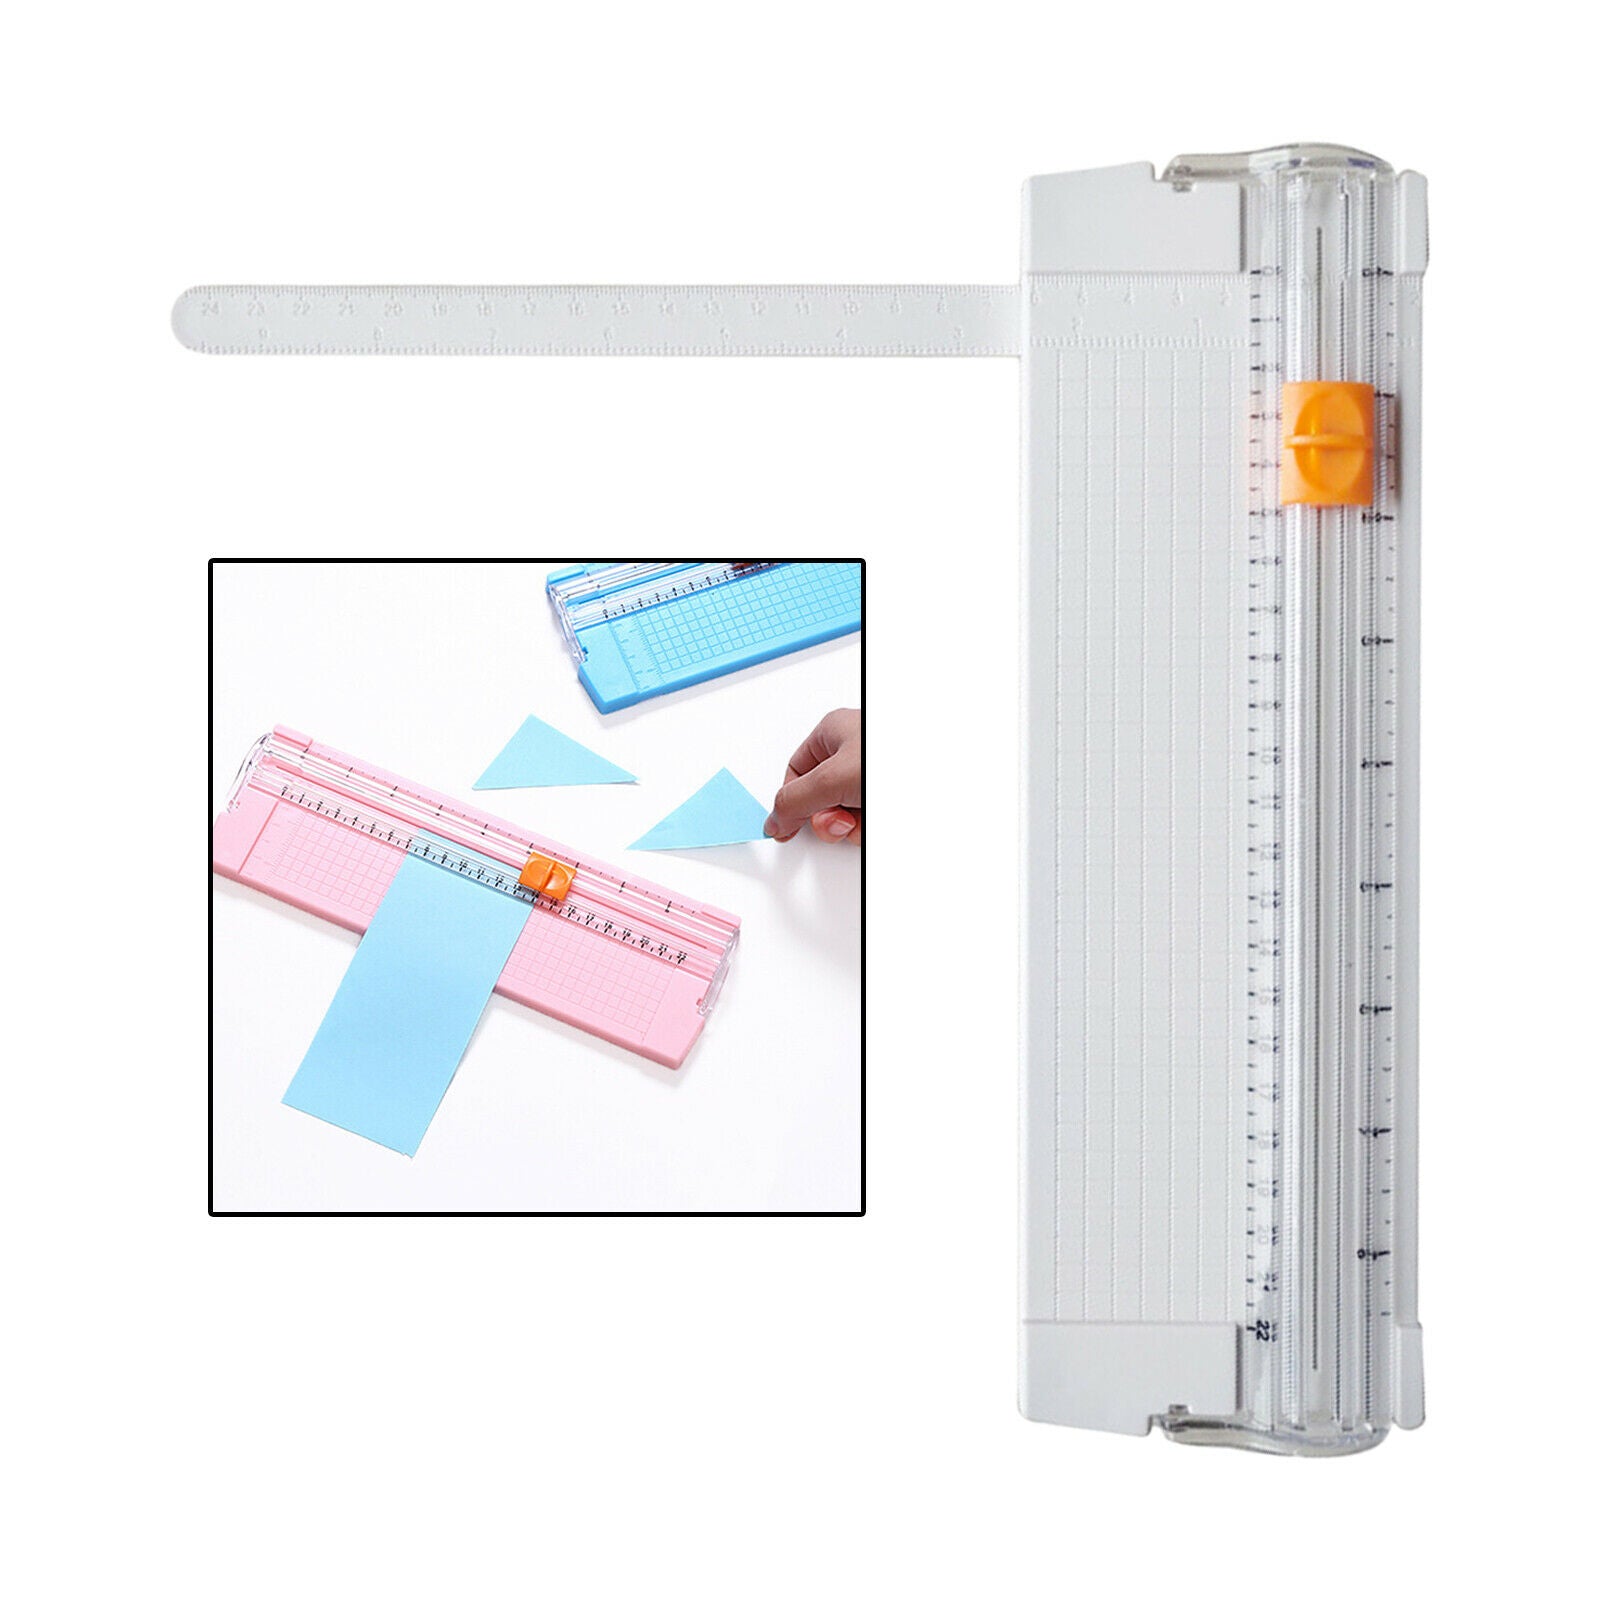 Paper Cutter Trimmer Mat Scrapbooking Tool for Trimming Home Office Supplies